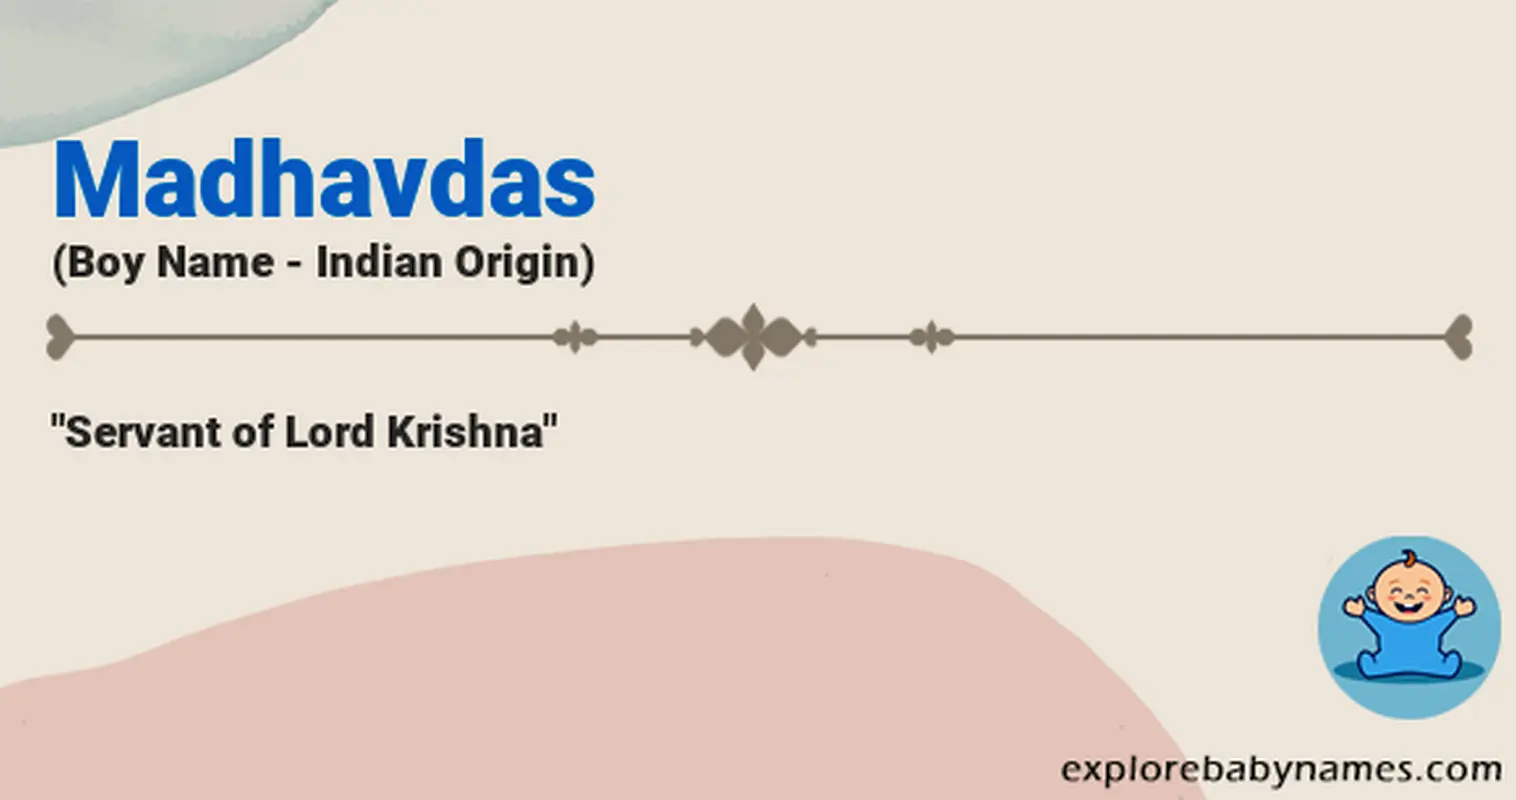 Meaning of Madhavdas